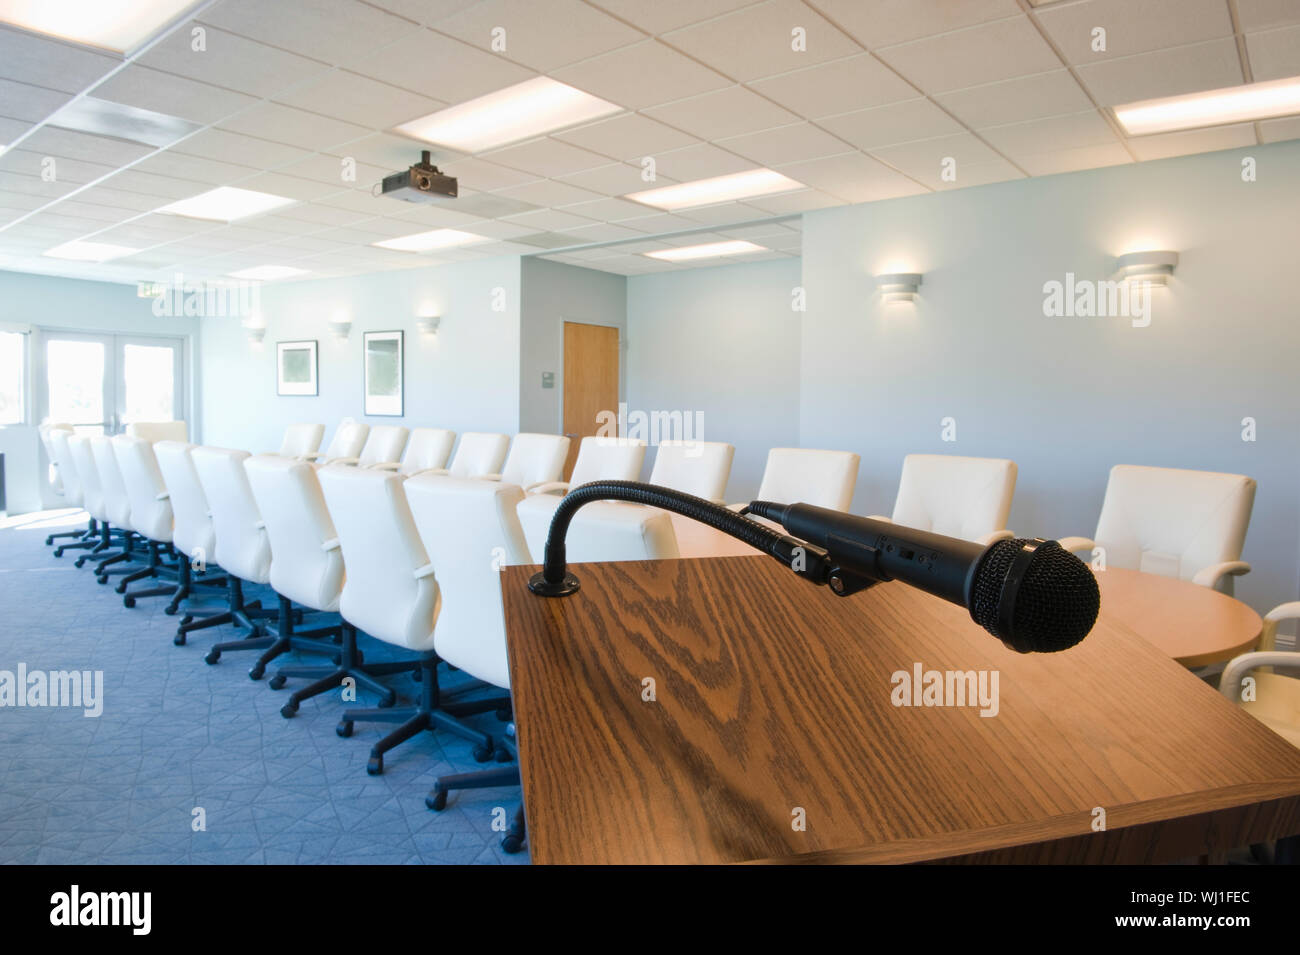 Installation Mic Solutions for Podium, Conference & Ceiling